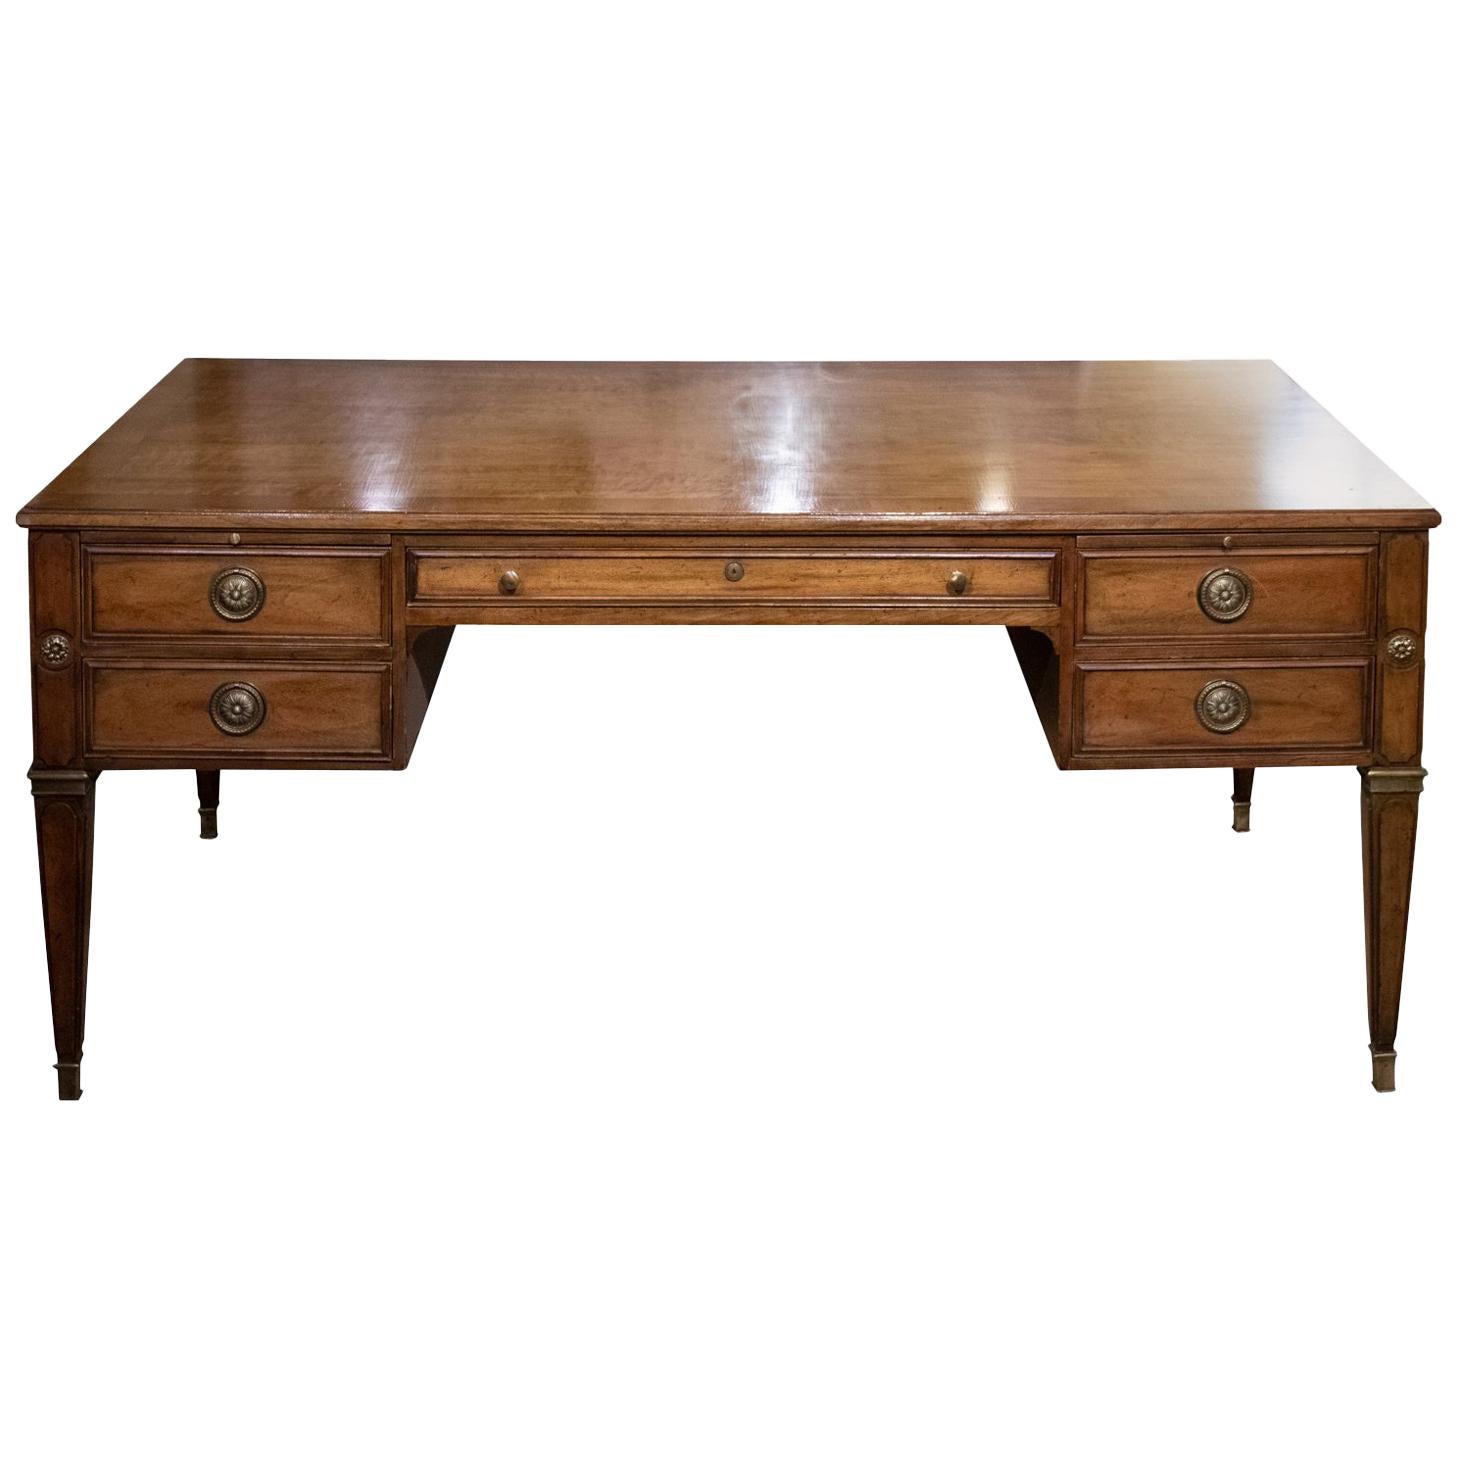 French Style Partner's Desk by Baker, circa 1970s